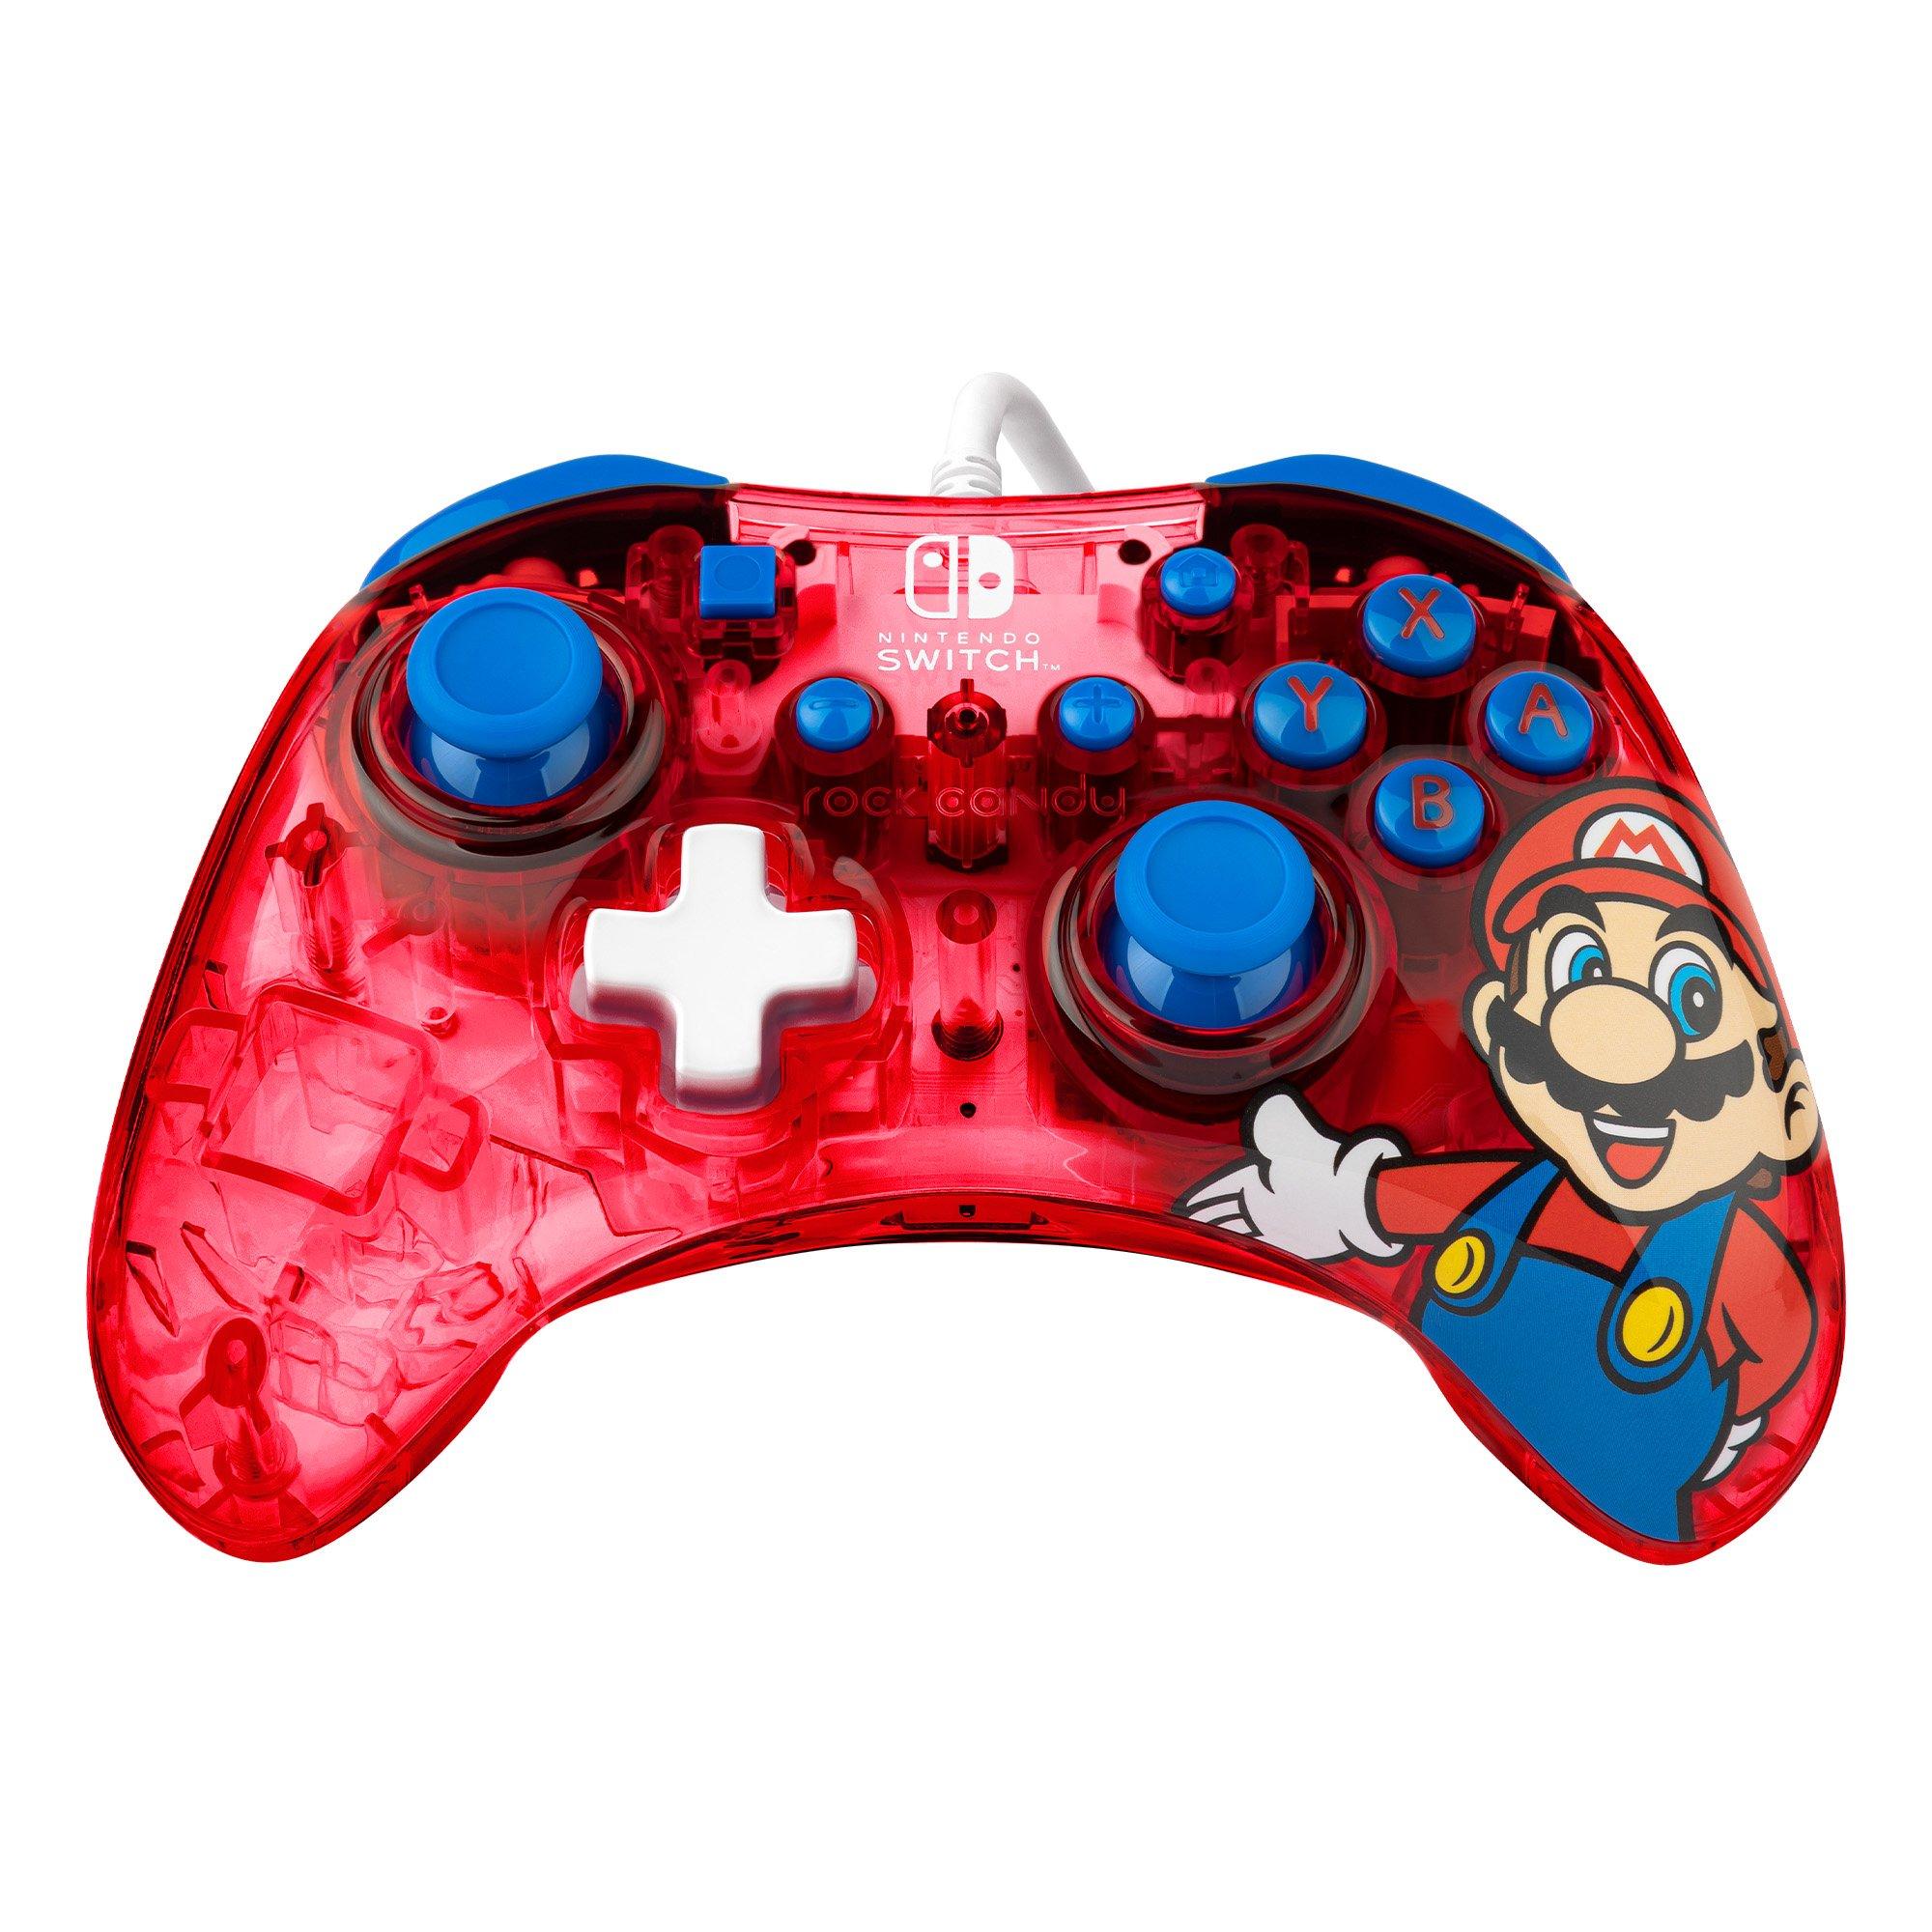 Rock Candy Super Mario Bros. Mario Wired Controller for Nintnedo Switch